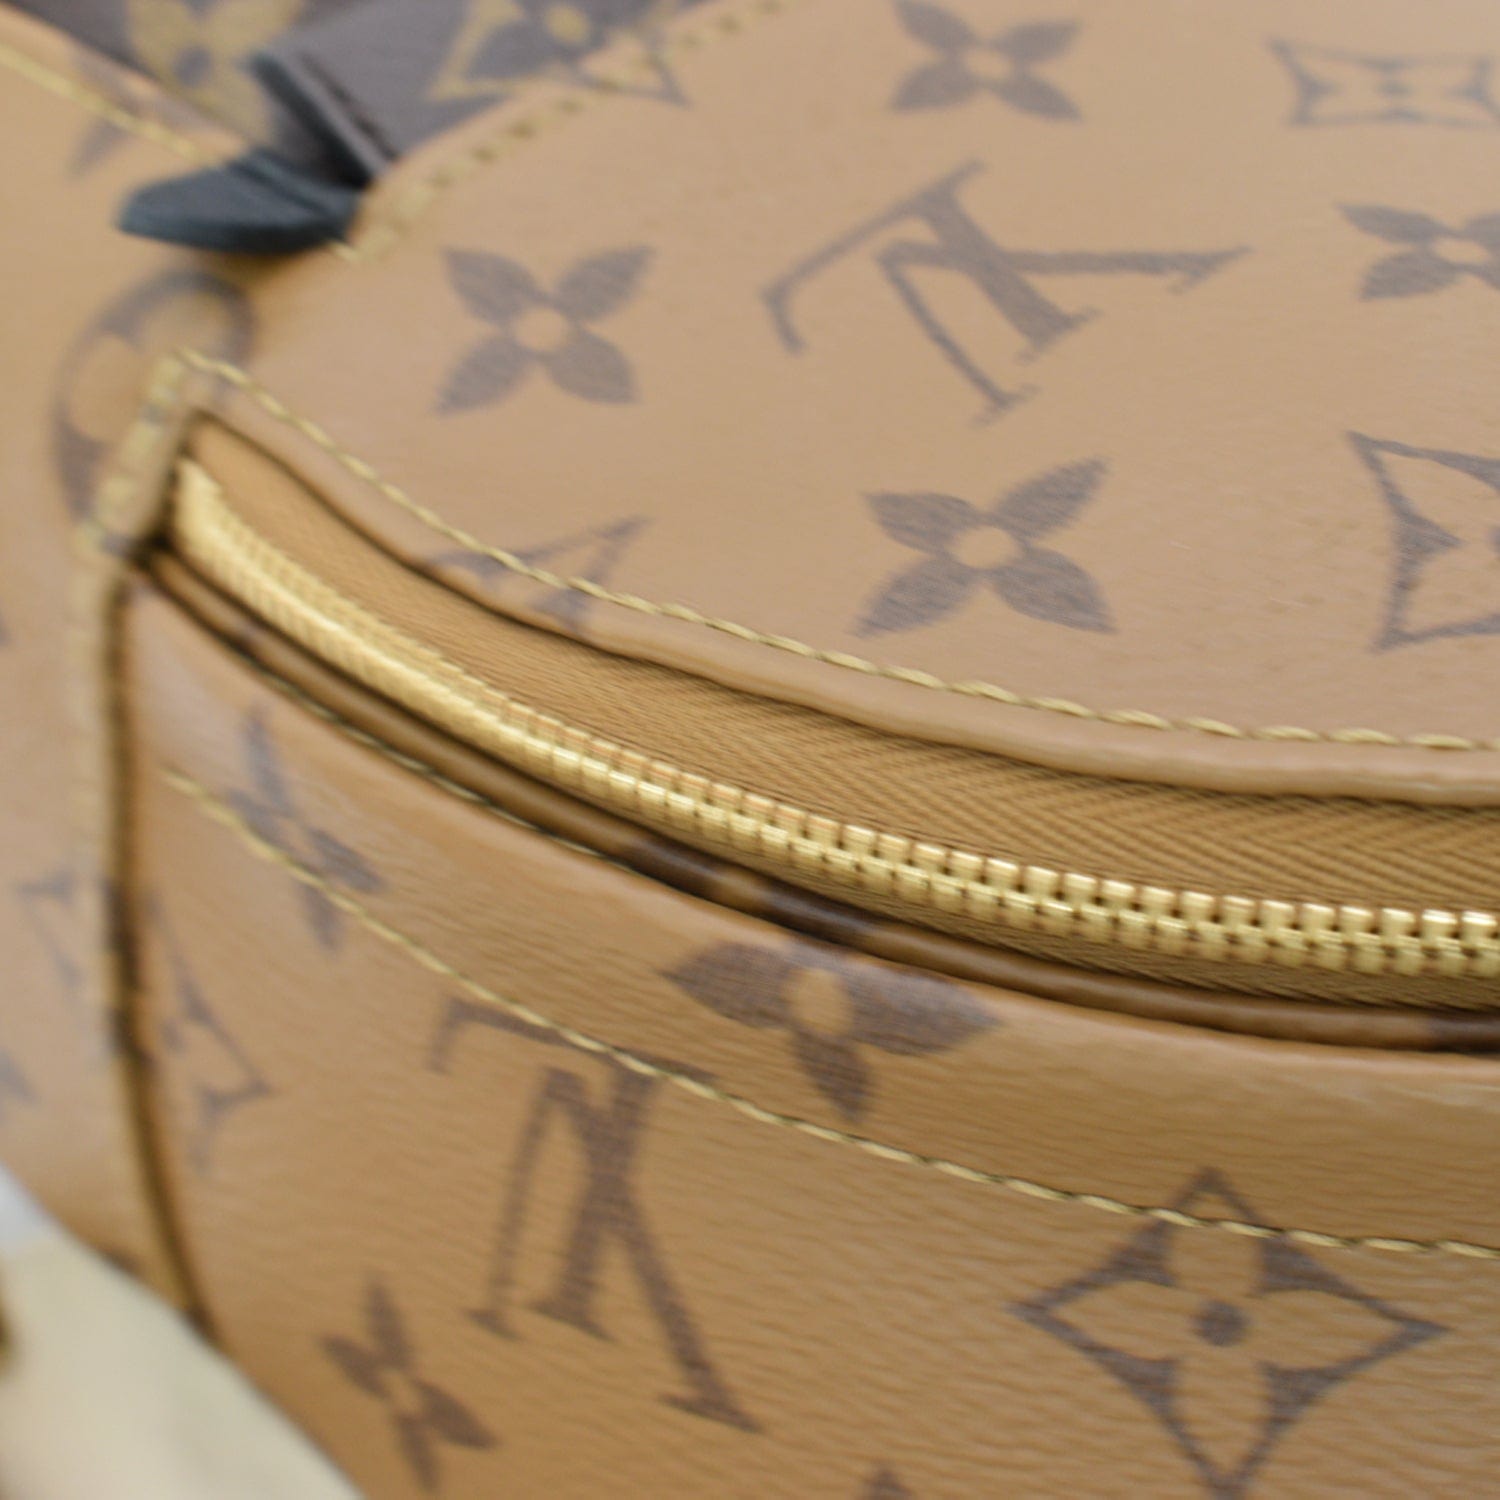 Louis Vuitton LV Women Palm Springs PM Backpack in Monogram Reverse Coated  Canvas-Brown - LULUX